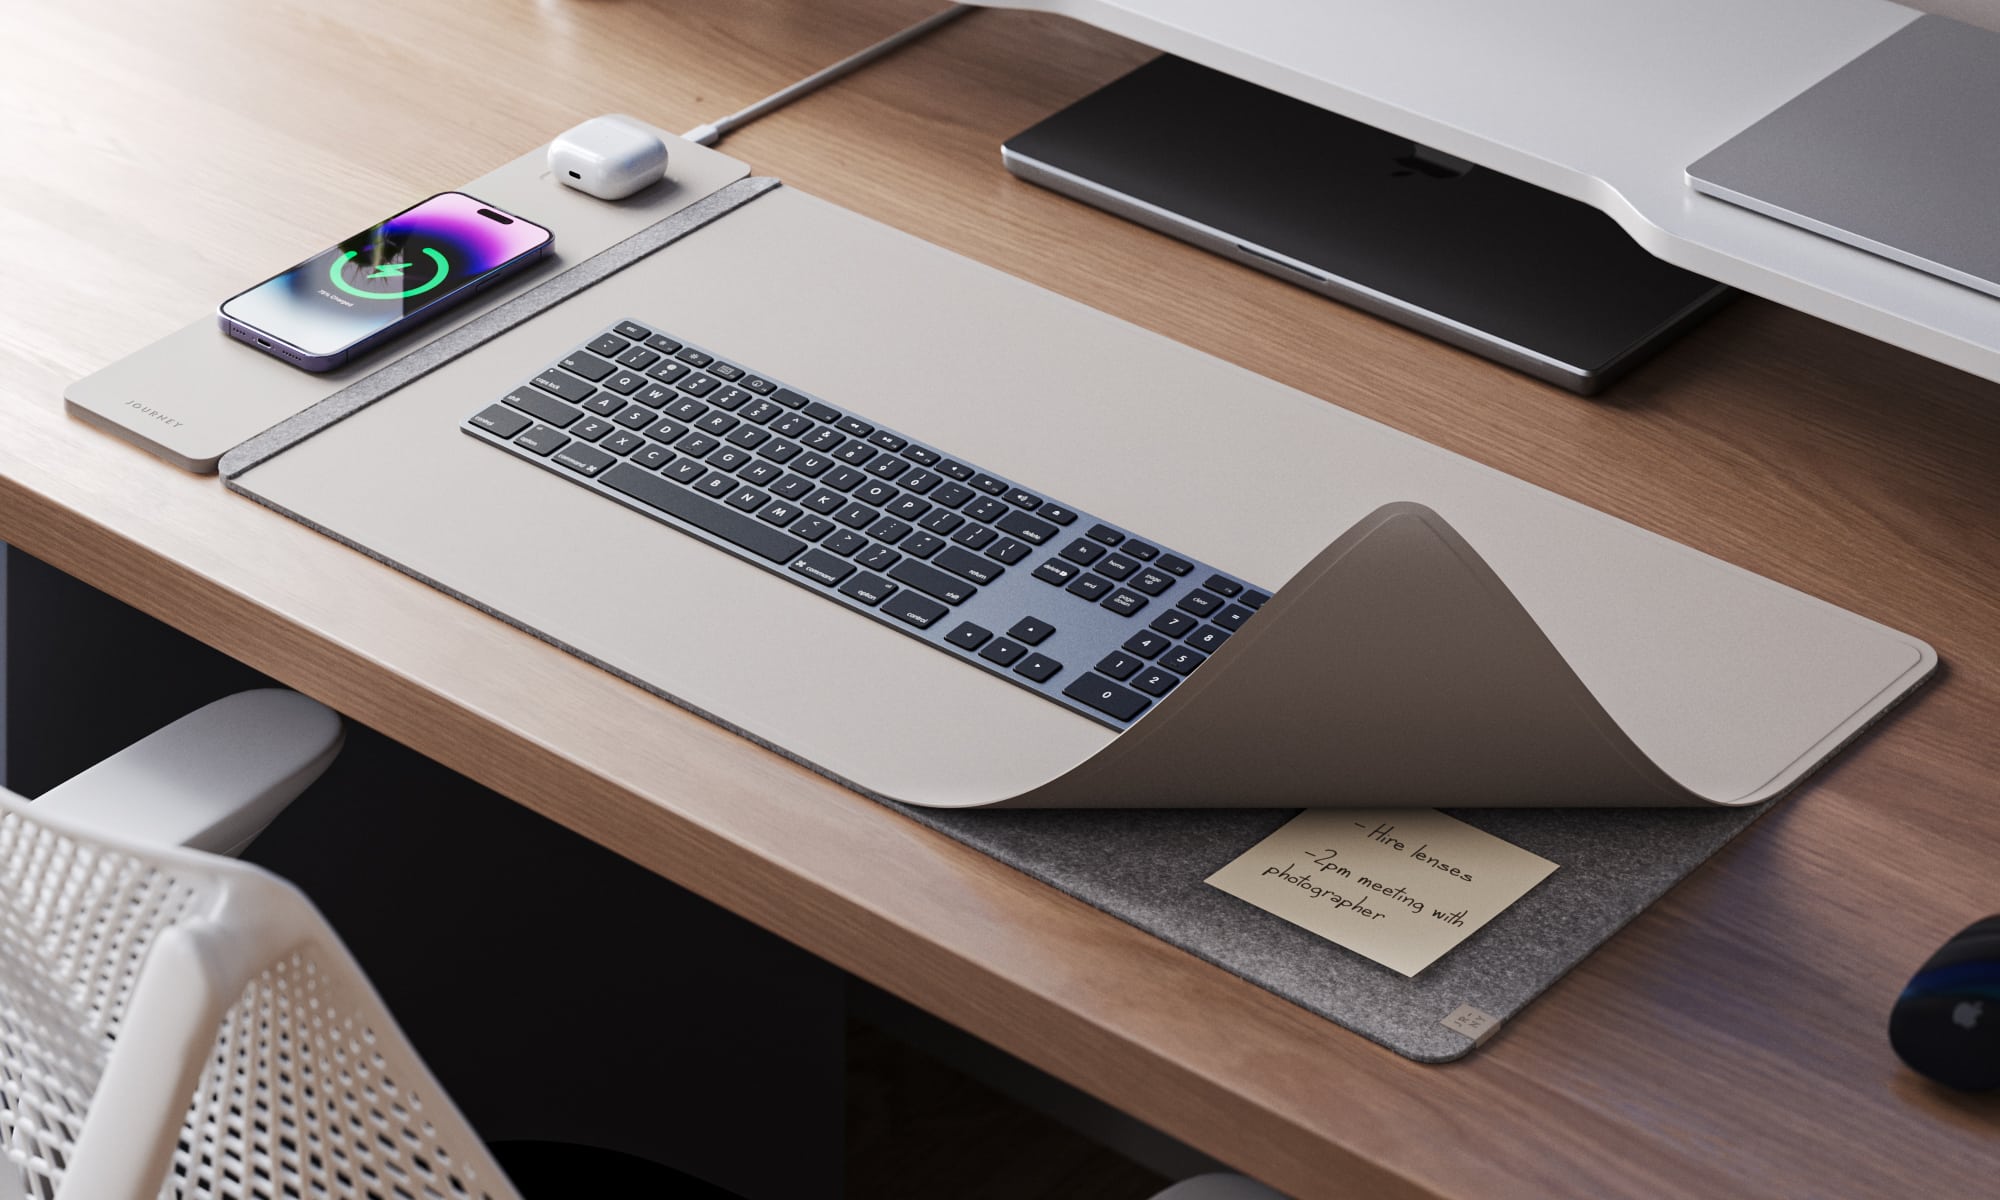 This clever new desk mat charges your iPhone and AirPods